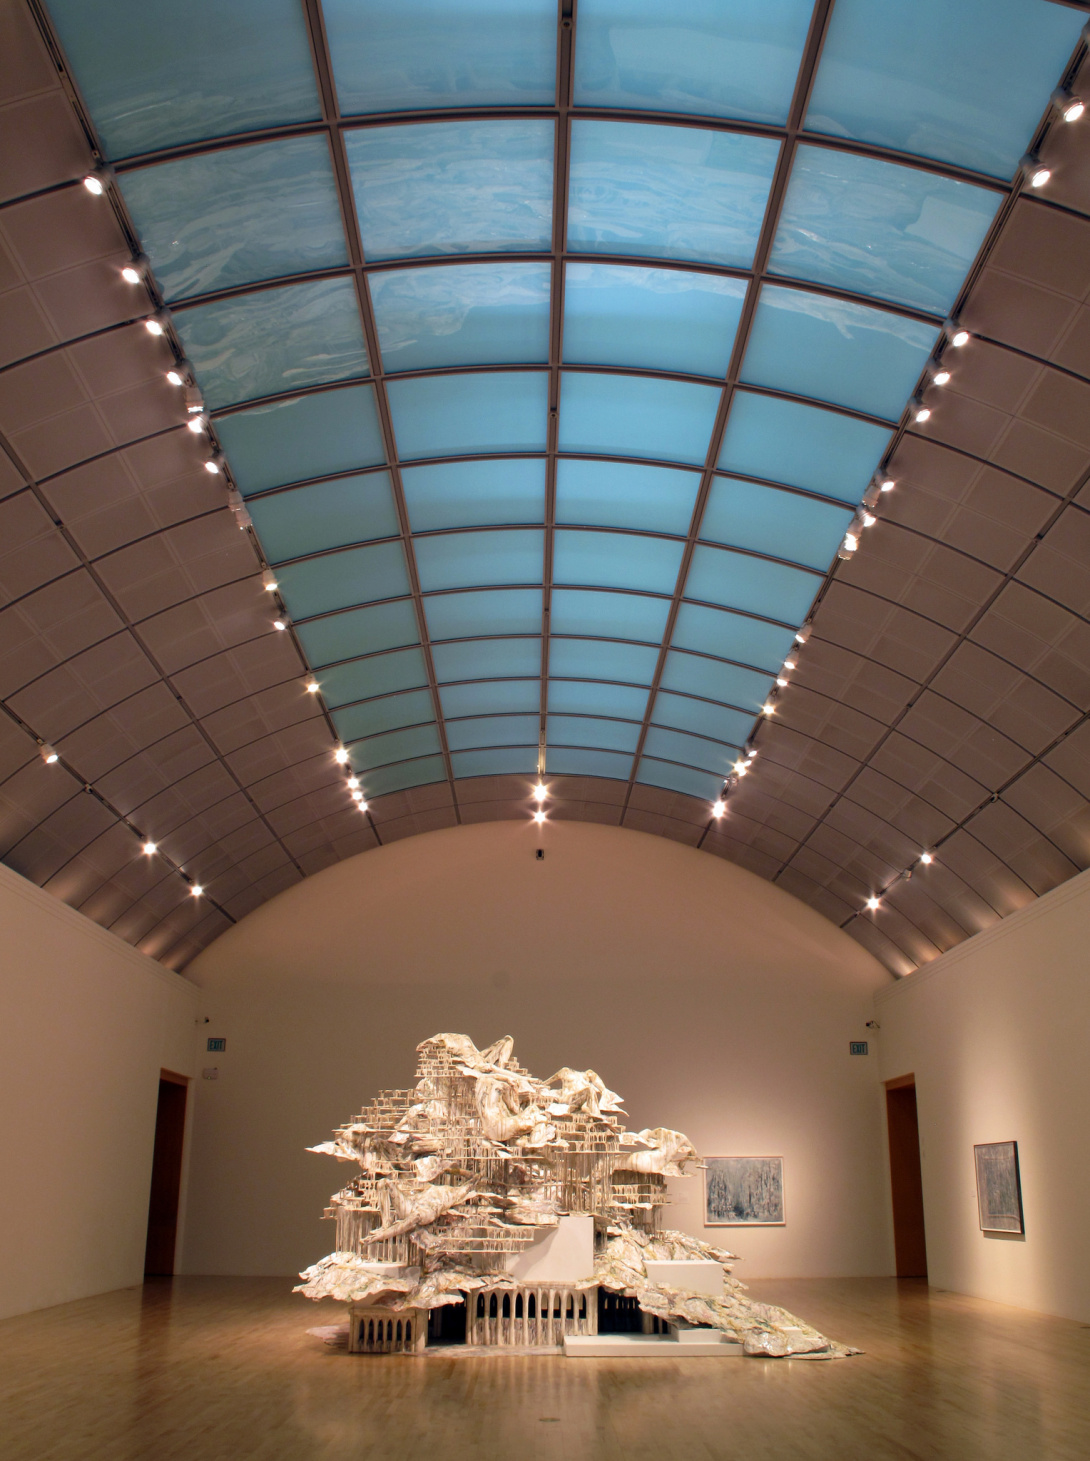 A large sculpture fills a gallery—like a cityscape with columns and boxes supporting the structure's height. It is covered in an unidentifiable white material is delicate and strong. It drips over the columns and boxes, appearing as roofs, treetops, clouds, and lounging oversized people.